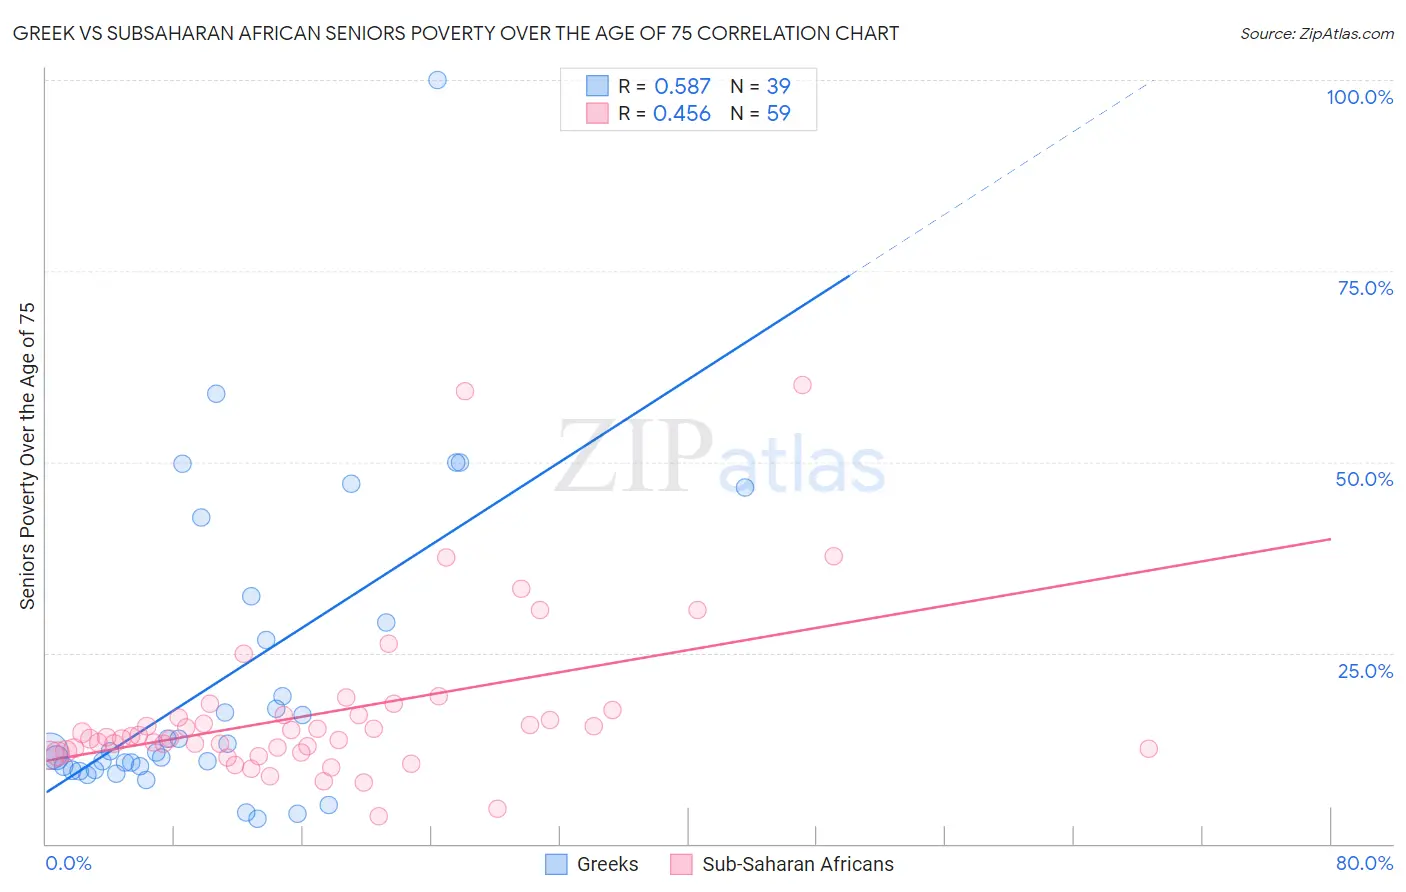 Greek vs Subsaharan African Seniors Poverty Over the Age of 75